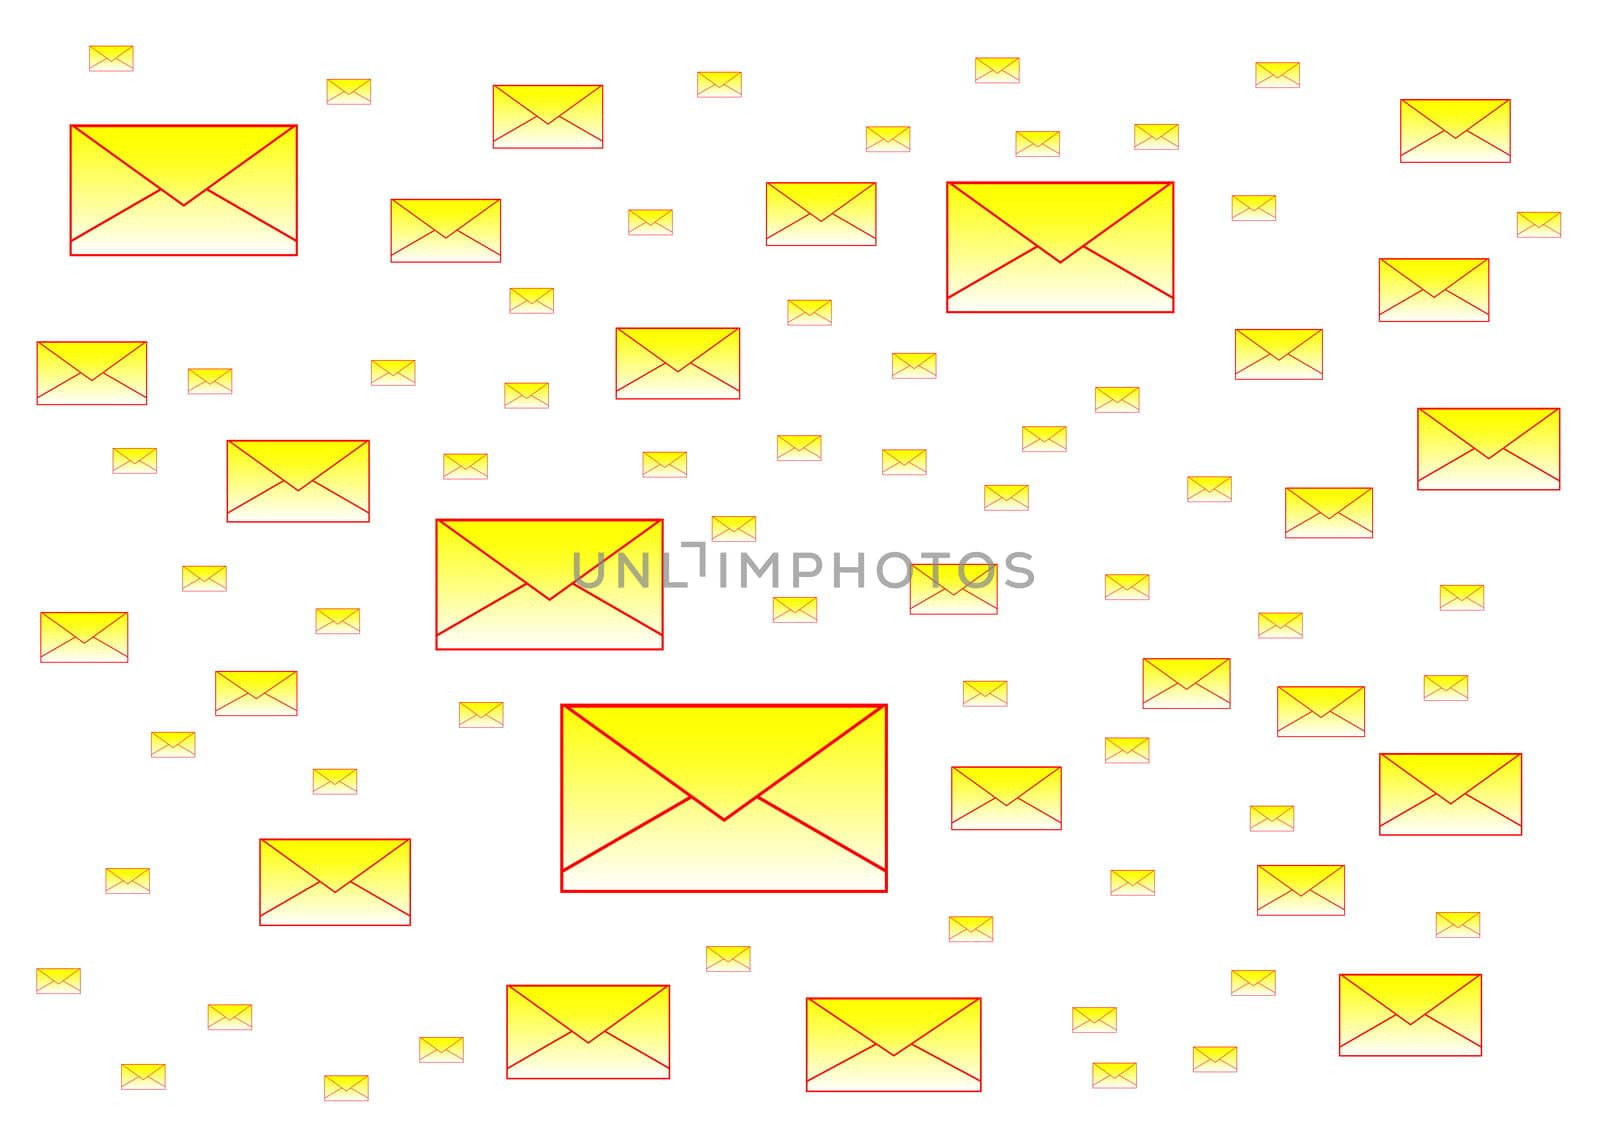 Spam letters by tomatto